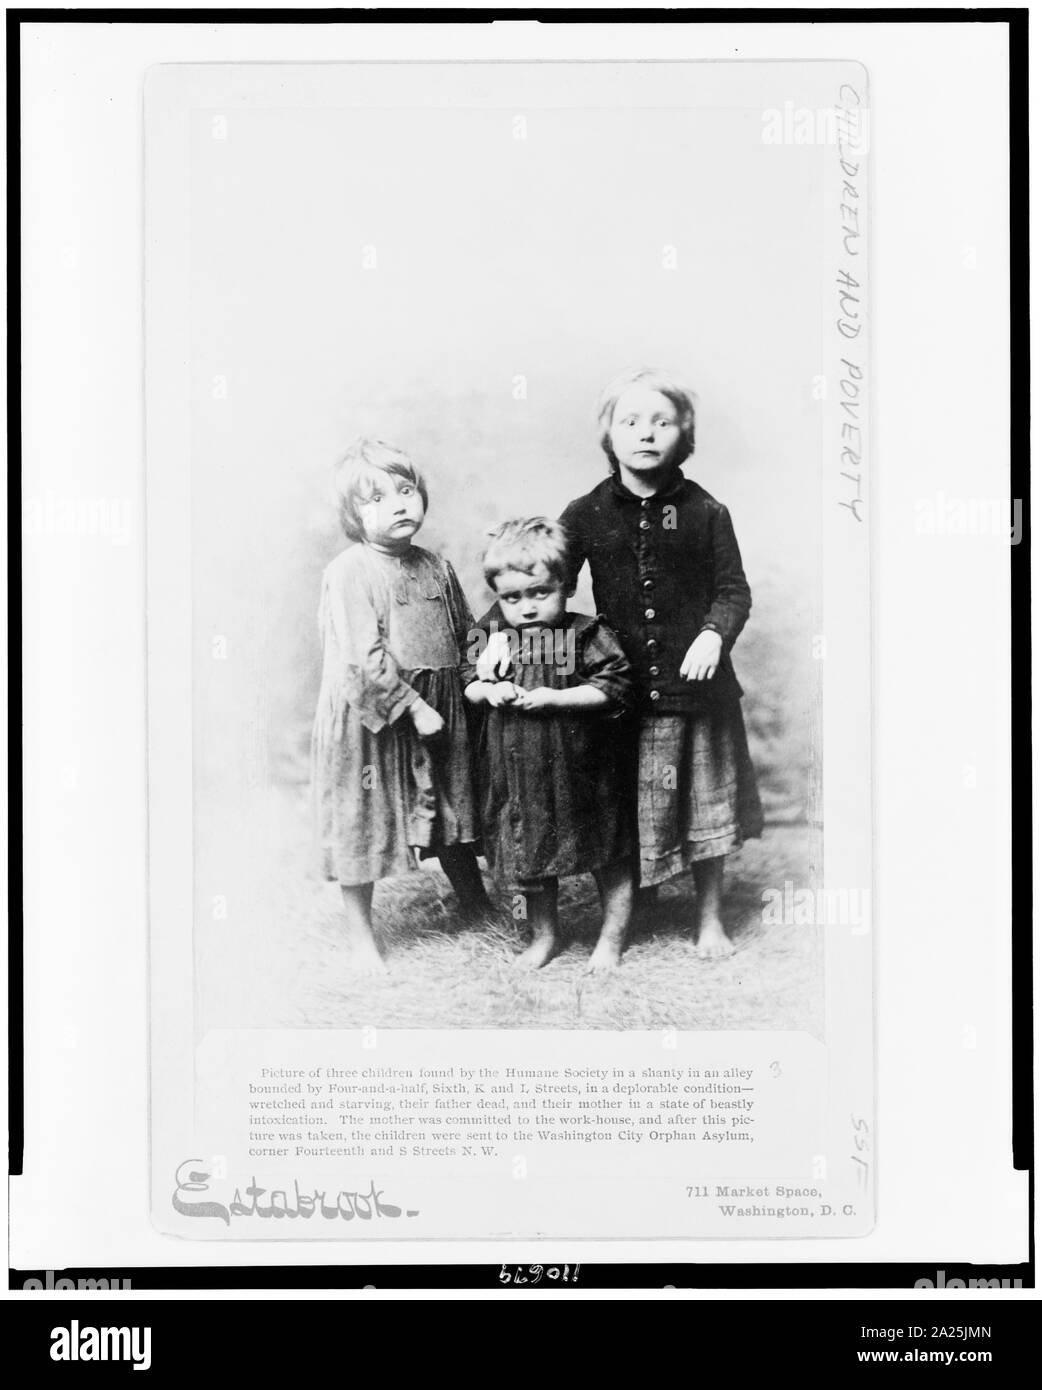 Picture of three children found by the Humane Society in a shanty in an alley bounded by Four-and-a-half, Sixth, K and L Streets, in a deplorable condition--wretched and starving, their father dead, and their mother in a state of beastly intoxication / Estabrook, Washington, D.C. Stock Photo